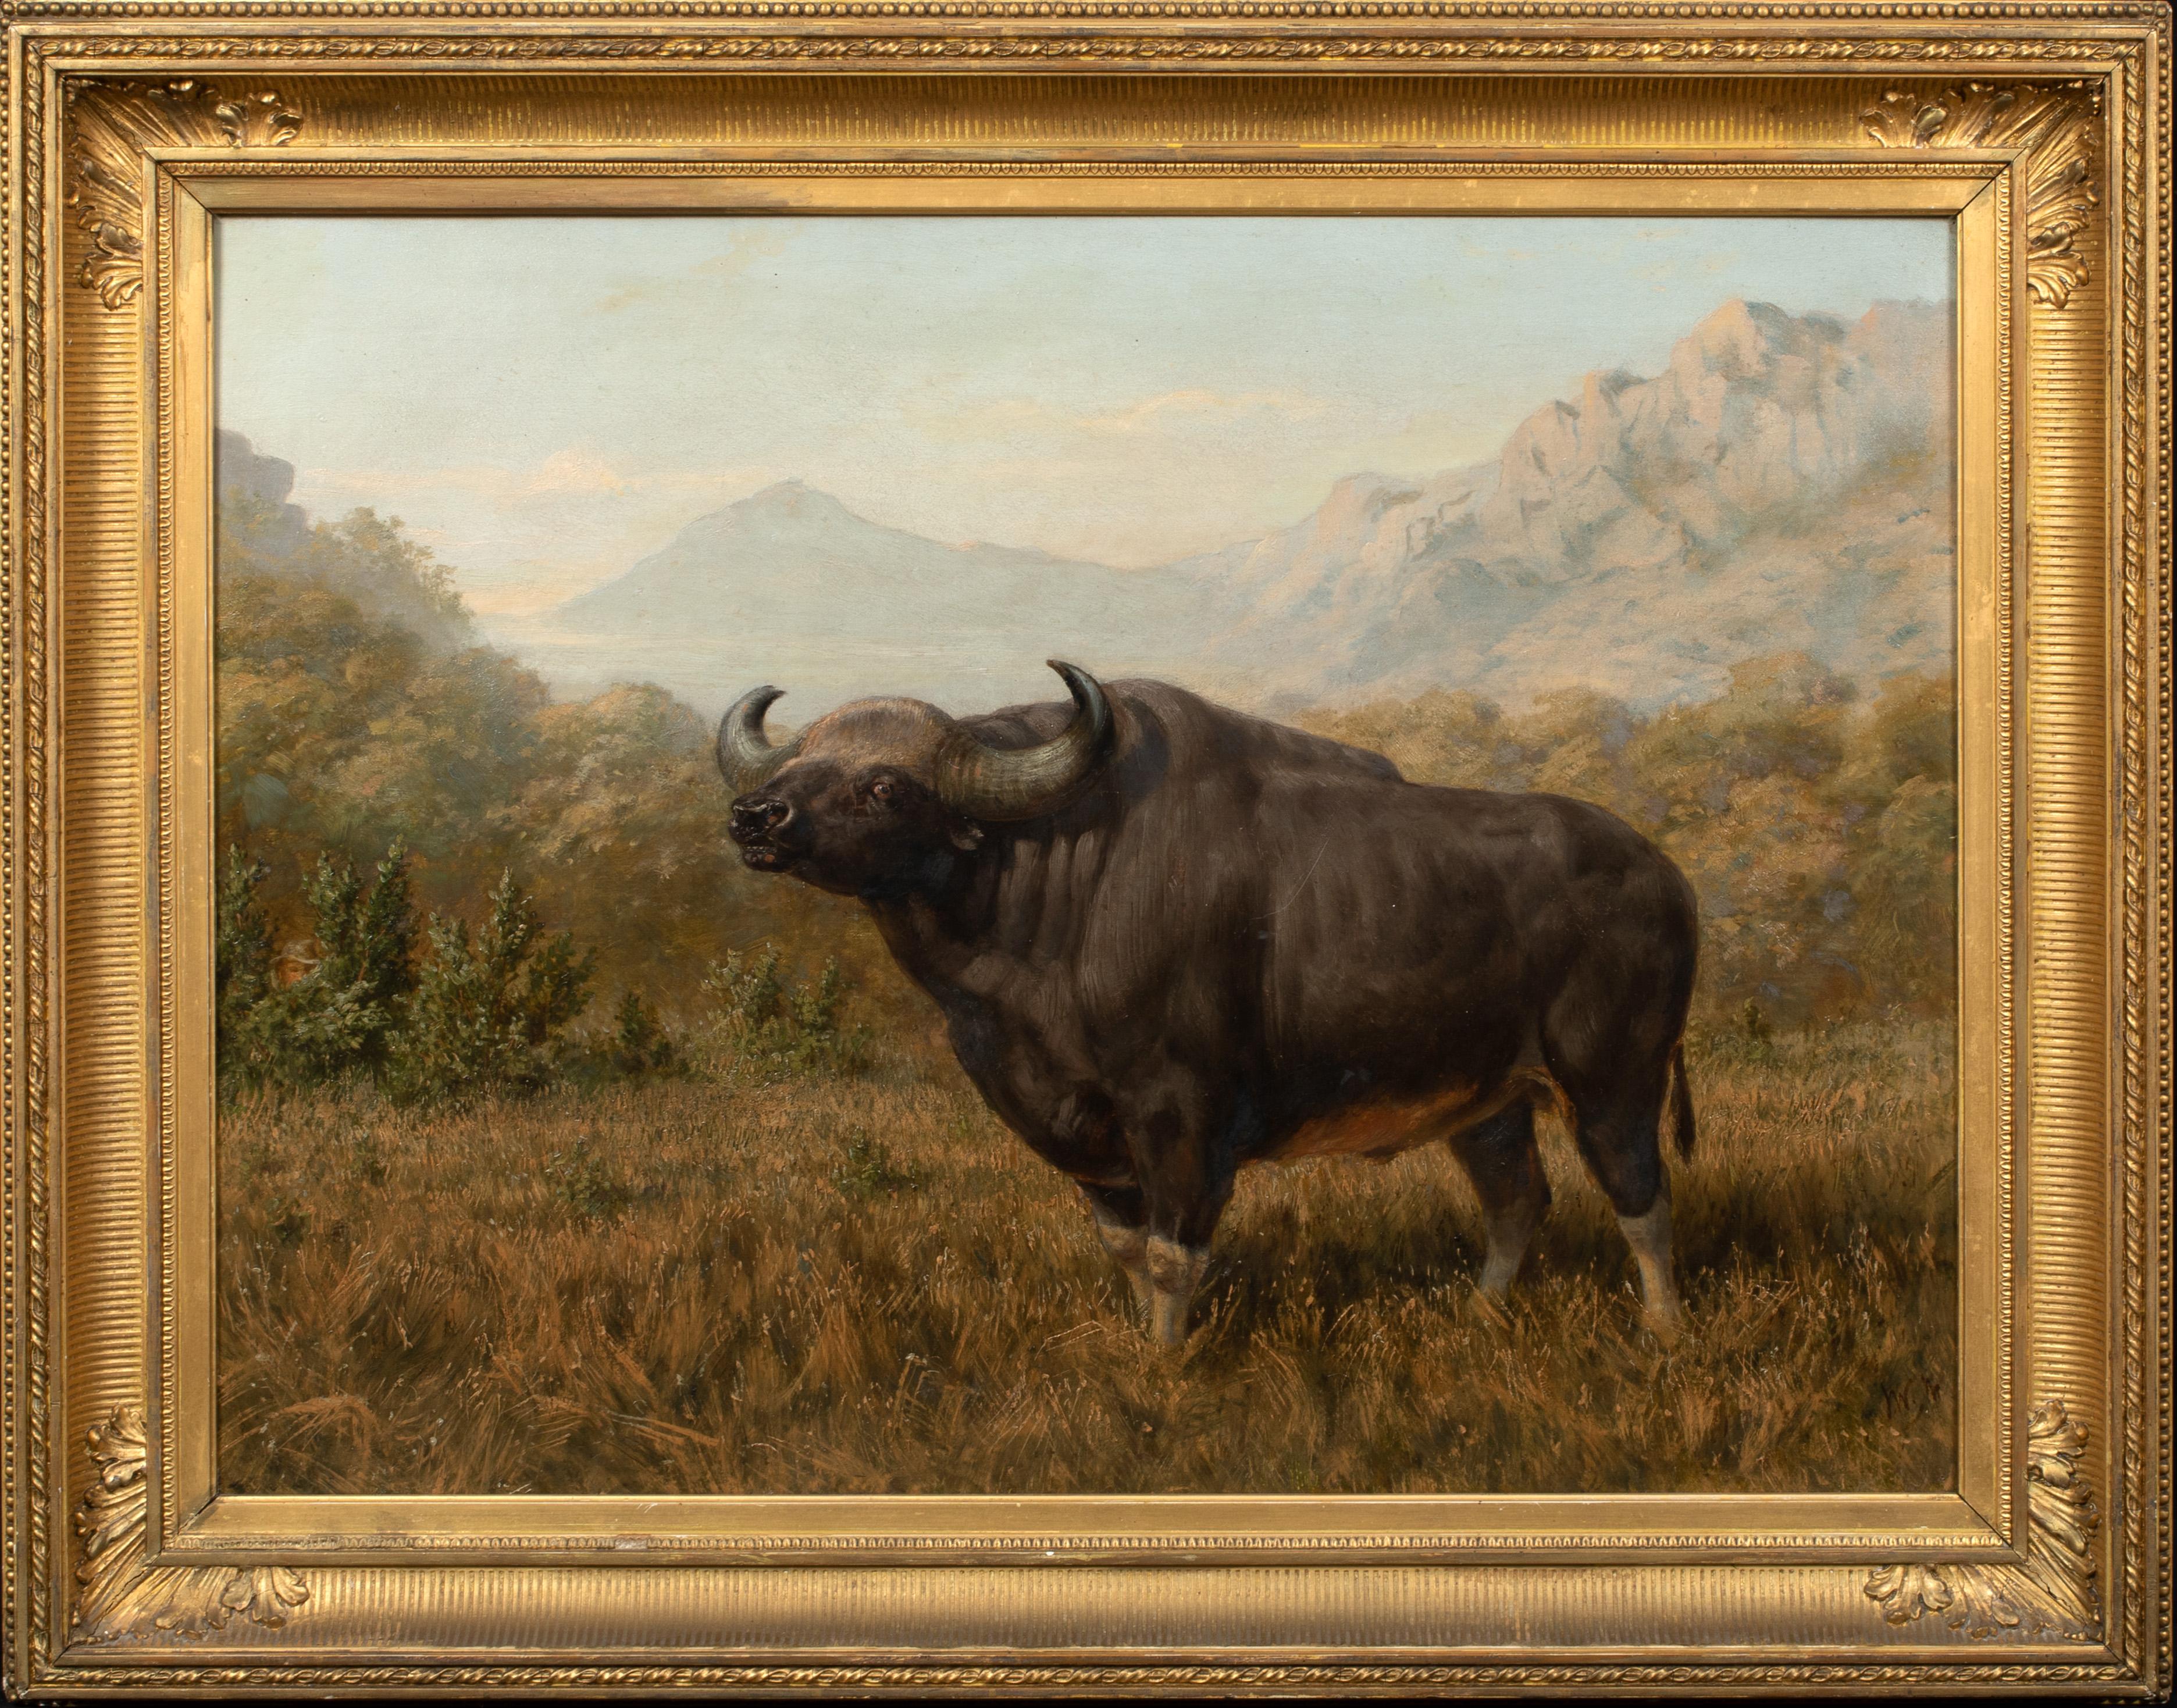 Joseph Wolf Portrait Painting - A Study Of Bison, 19th century 